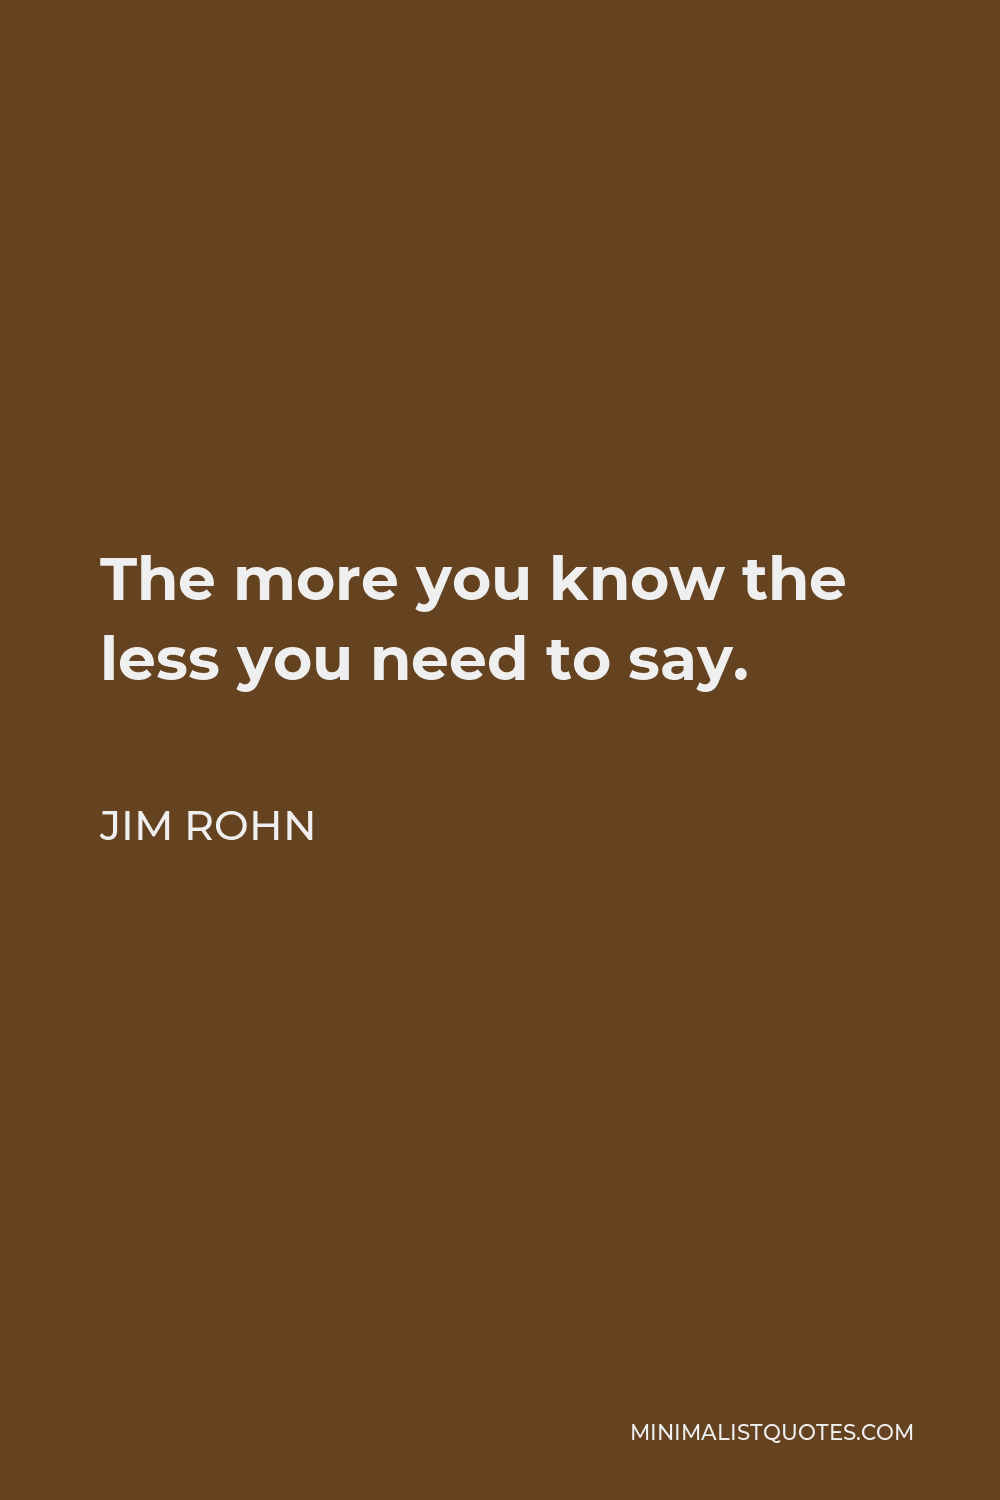 Jim Rohn Quote - The more you know the less you need to say.